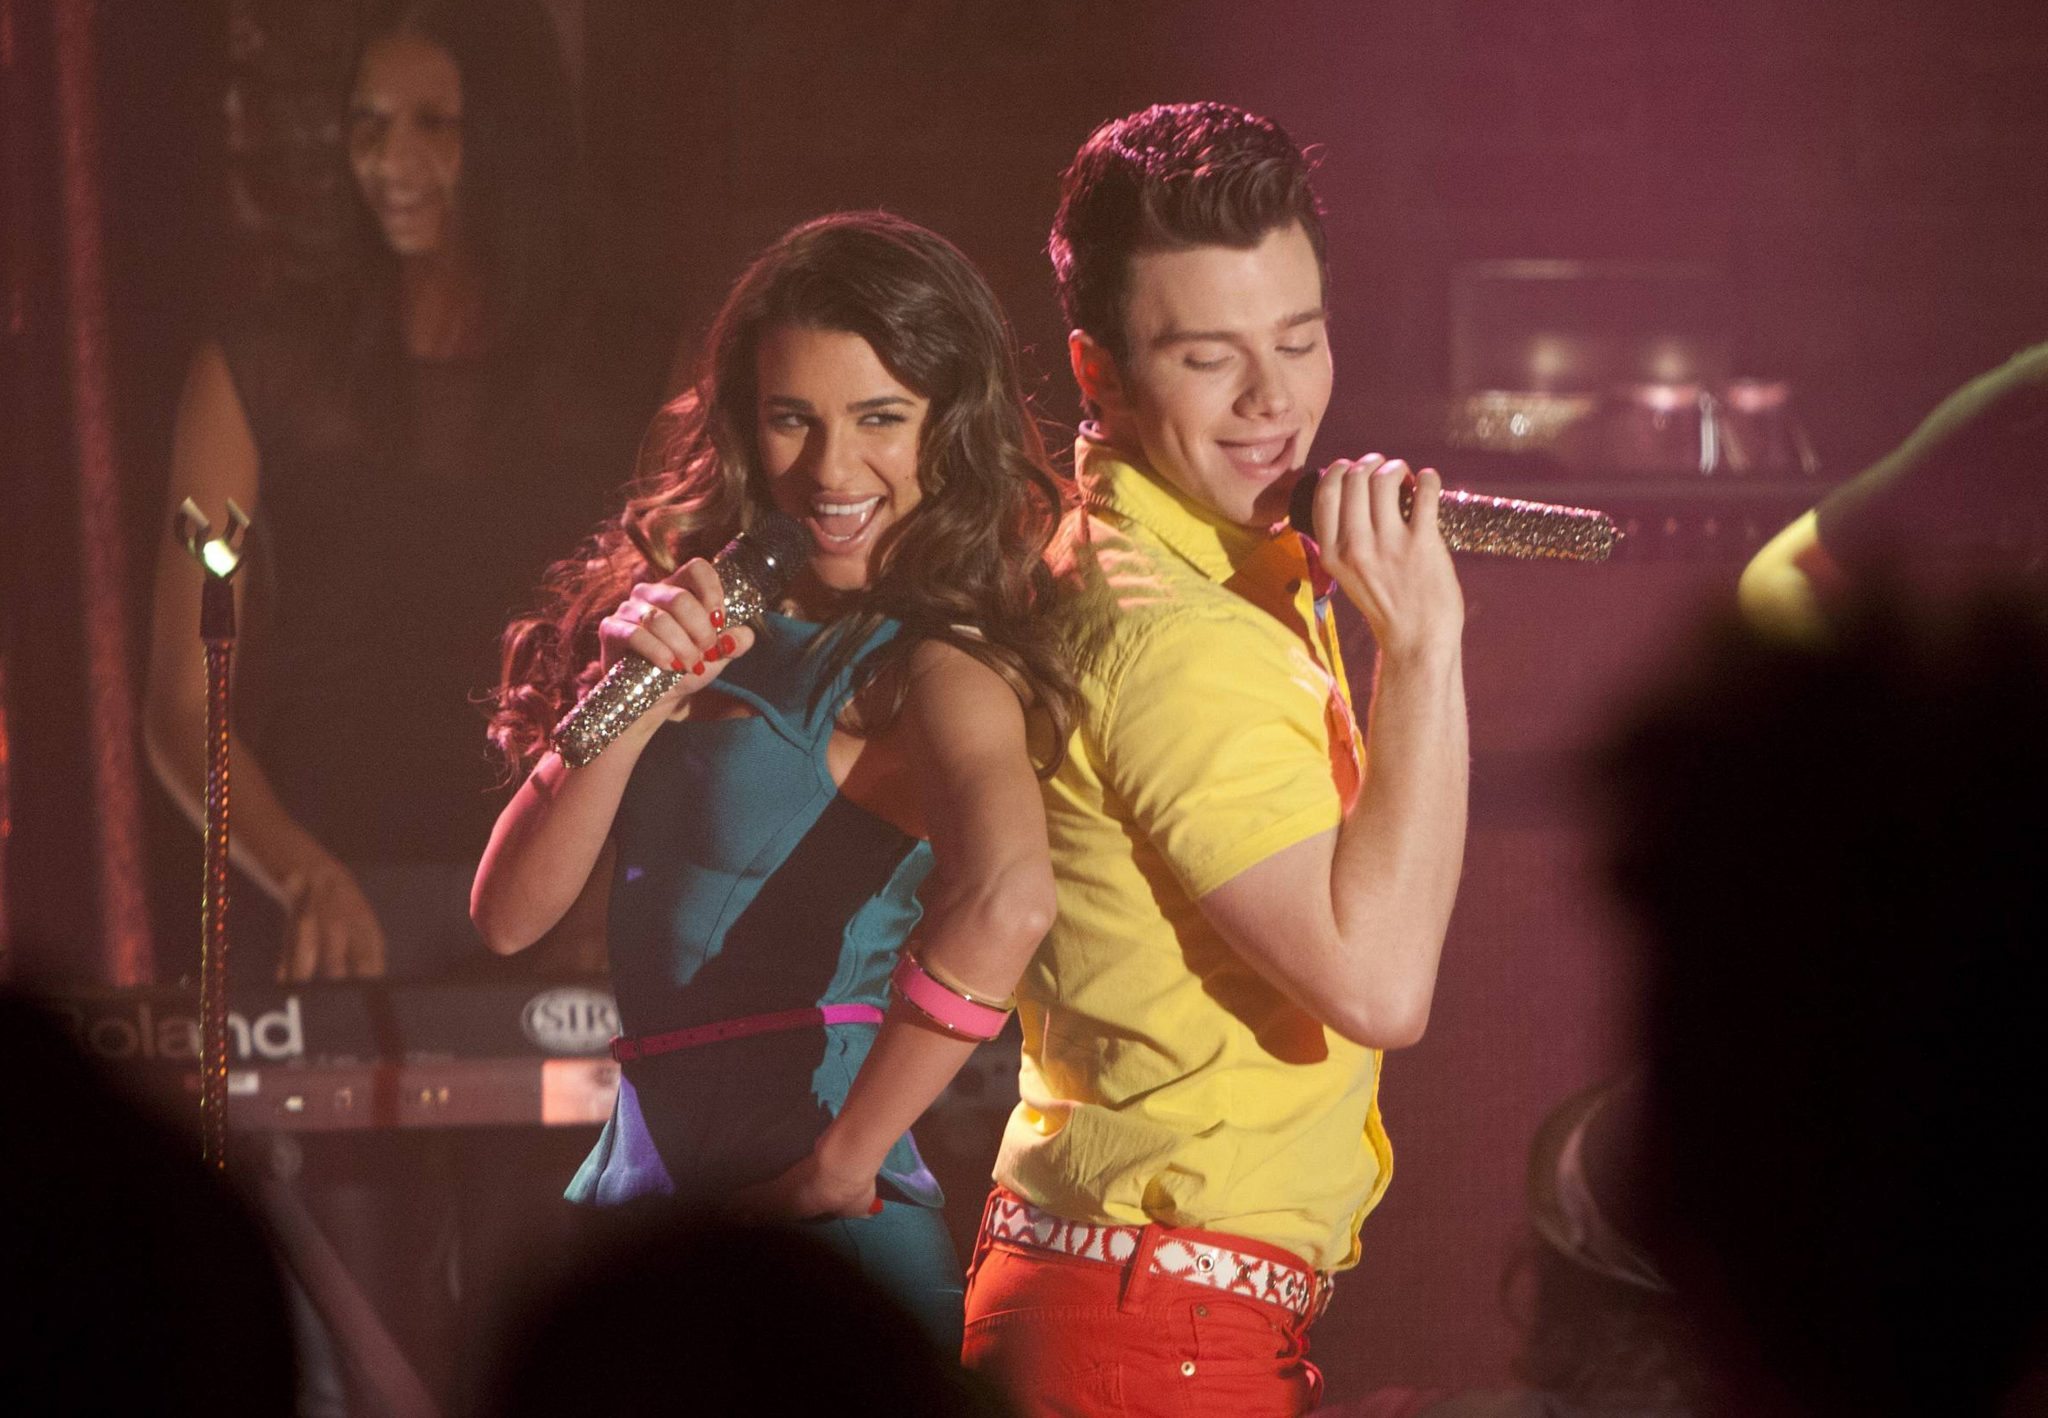 GLEE: Kurt (Chris Colfer, R) and Rachel (Lea Michele, L) perform at their first official gig in the "Puppet Master" episode of GLEE airing Thursday, Nov. 28 (9:00-10:00 PM ET/PT) on FOX. ©2013 Fox Broadcasting Co. CR: Adam Rose/FOX